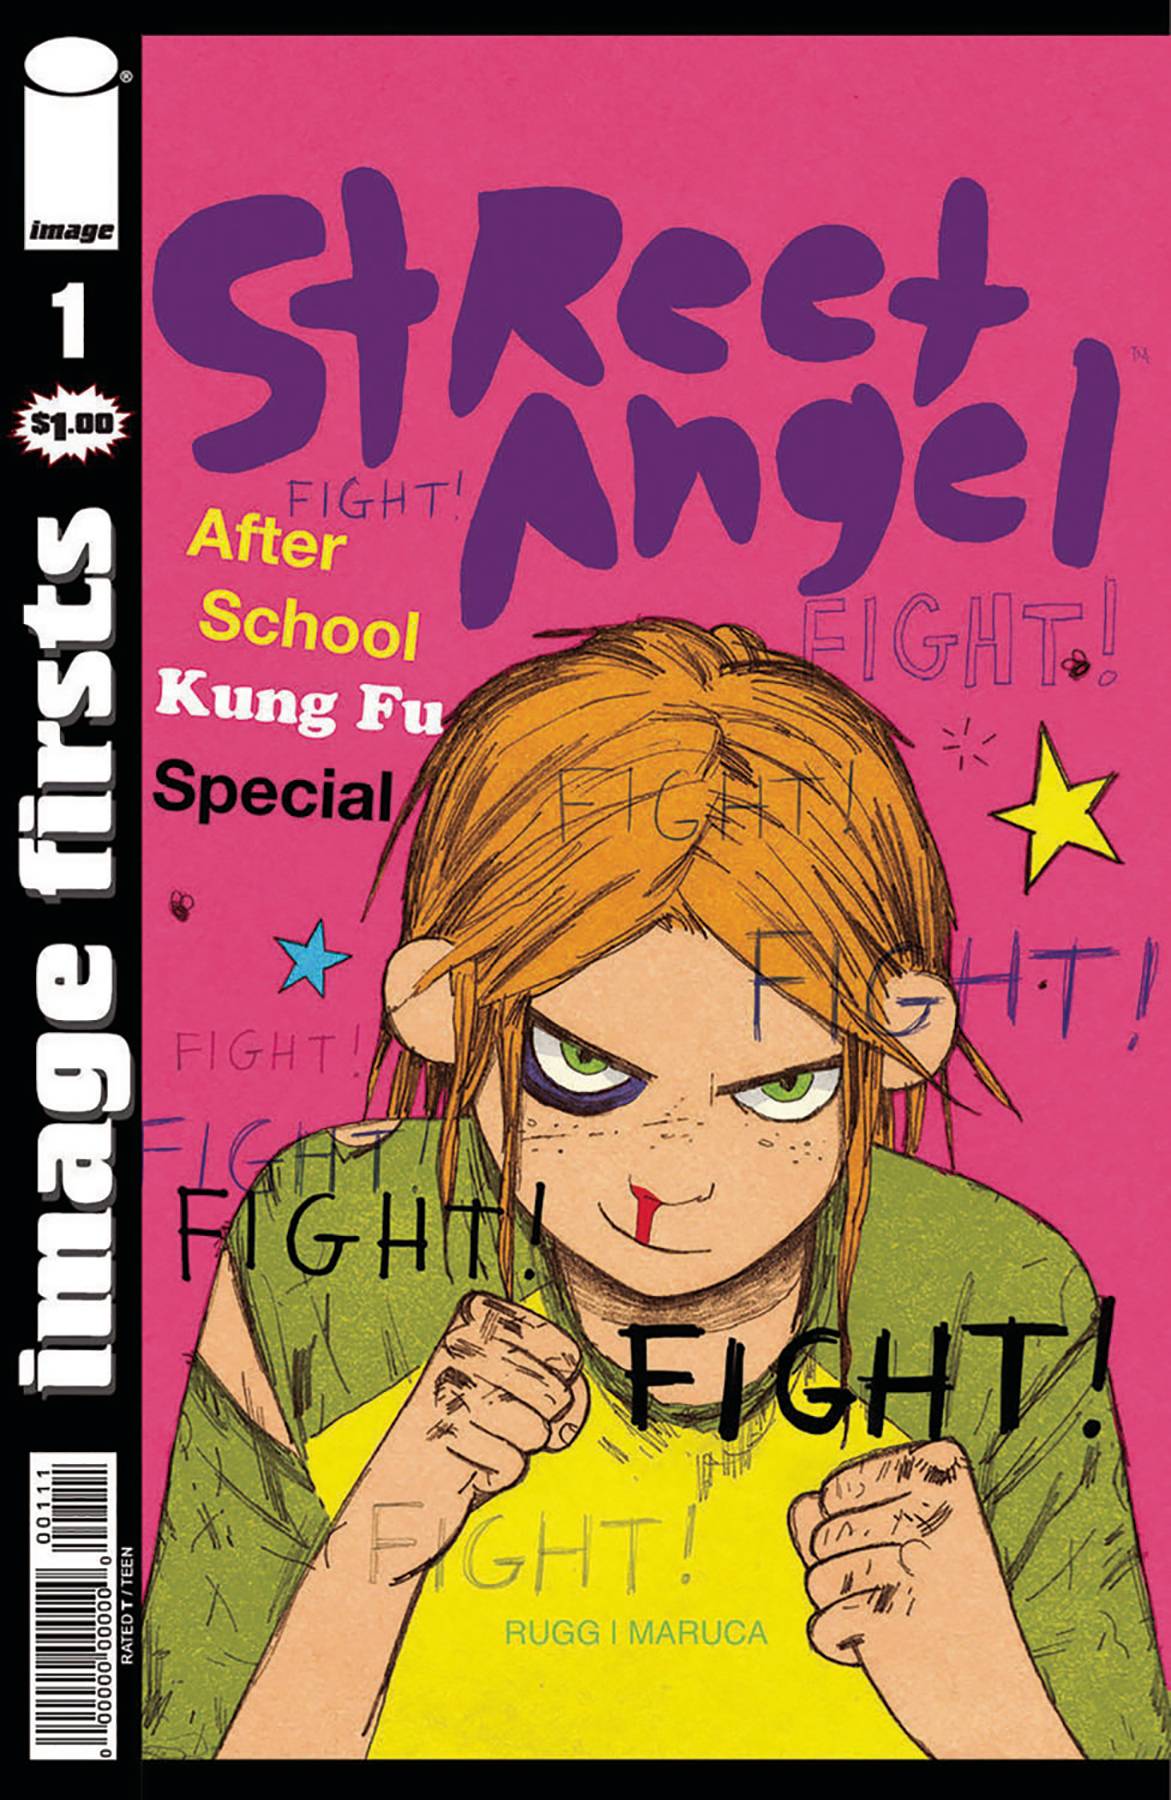 IMAGE FIRSTS STREET ANGEL #1